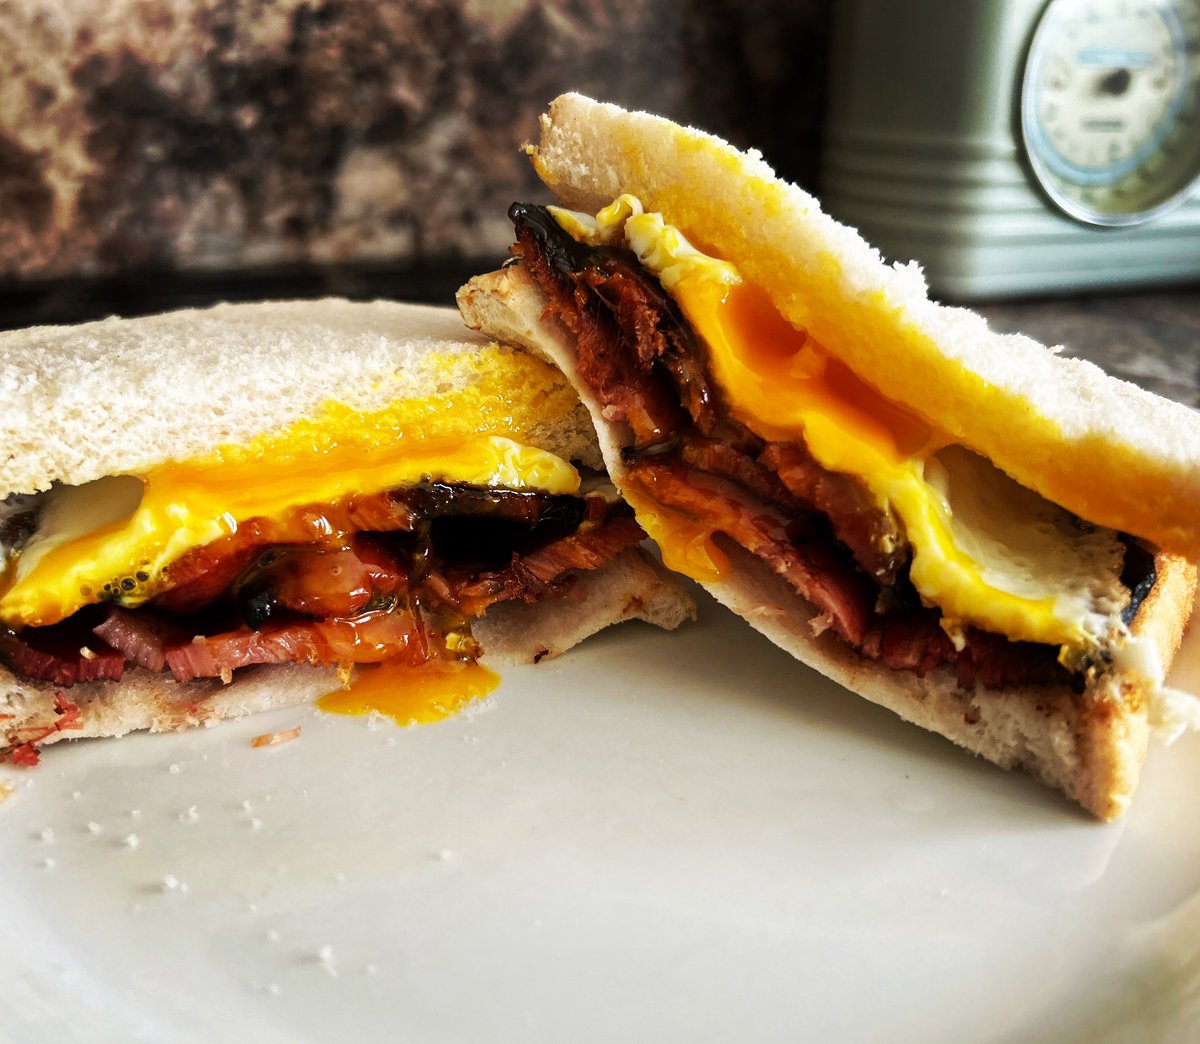 Quite possibly the best bacon sandwich I’ve ever had! 👌
Black treacle bacon 🥓
Local Guinea fowl egg 🍳 
#biteintobritish #backbritishfarming #baconsandwich #bacon #baconmakeseverythingbetter #britishfoodfortnight #lovebritishfood @LoveBritishFood @BiteintoBritish @SaveGBBacon